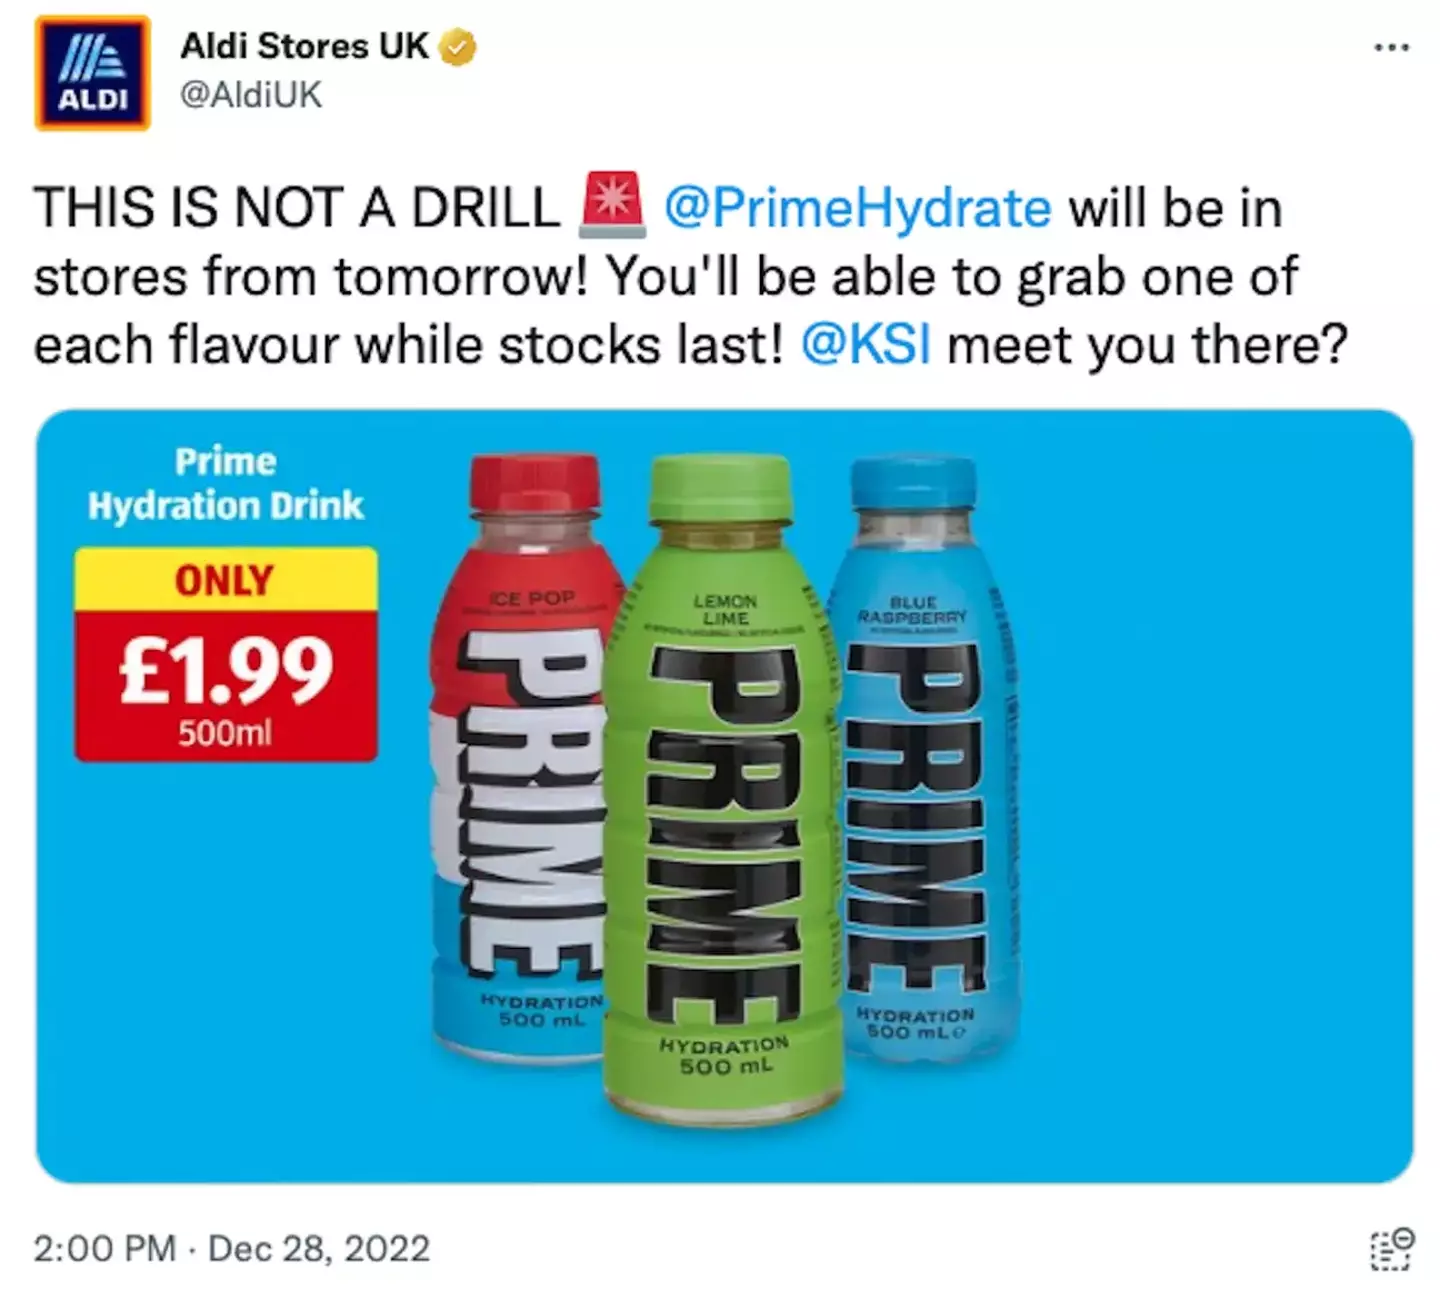 Supermarket giant Aldi issuing an apology after so many customers were left empty-handed last week.